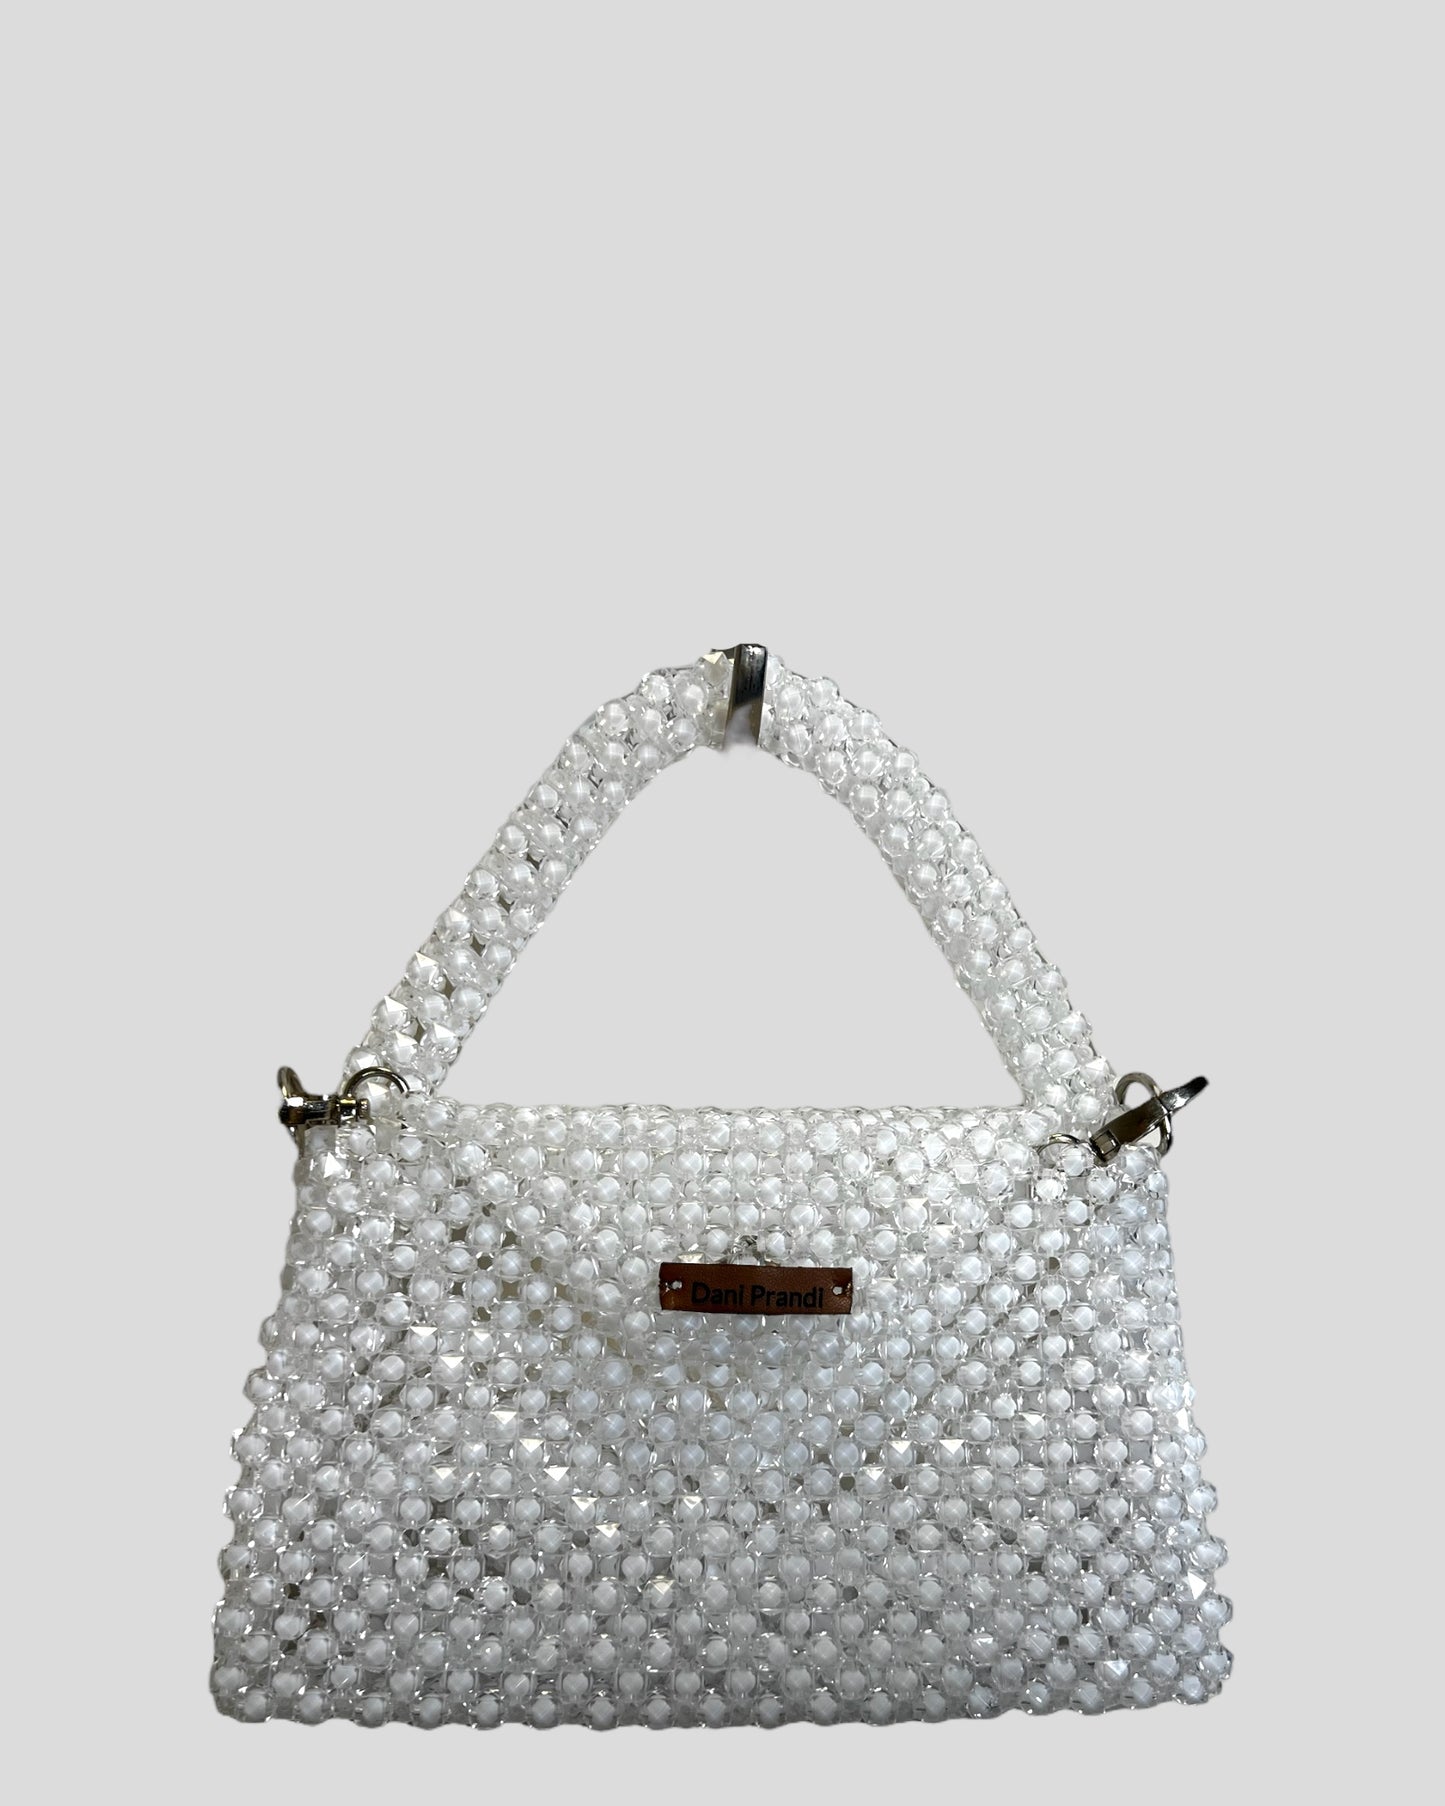 high-quality mini bag adorned with a delicate fake pearl border, exuding luxurious elegance. The bag comes with a removable shoulder strap made of the same material, offering versatile styling options. The transparent white color adds a timeless touch, making it an easy match for various looks.